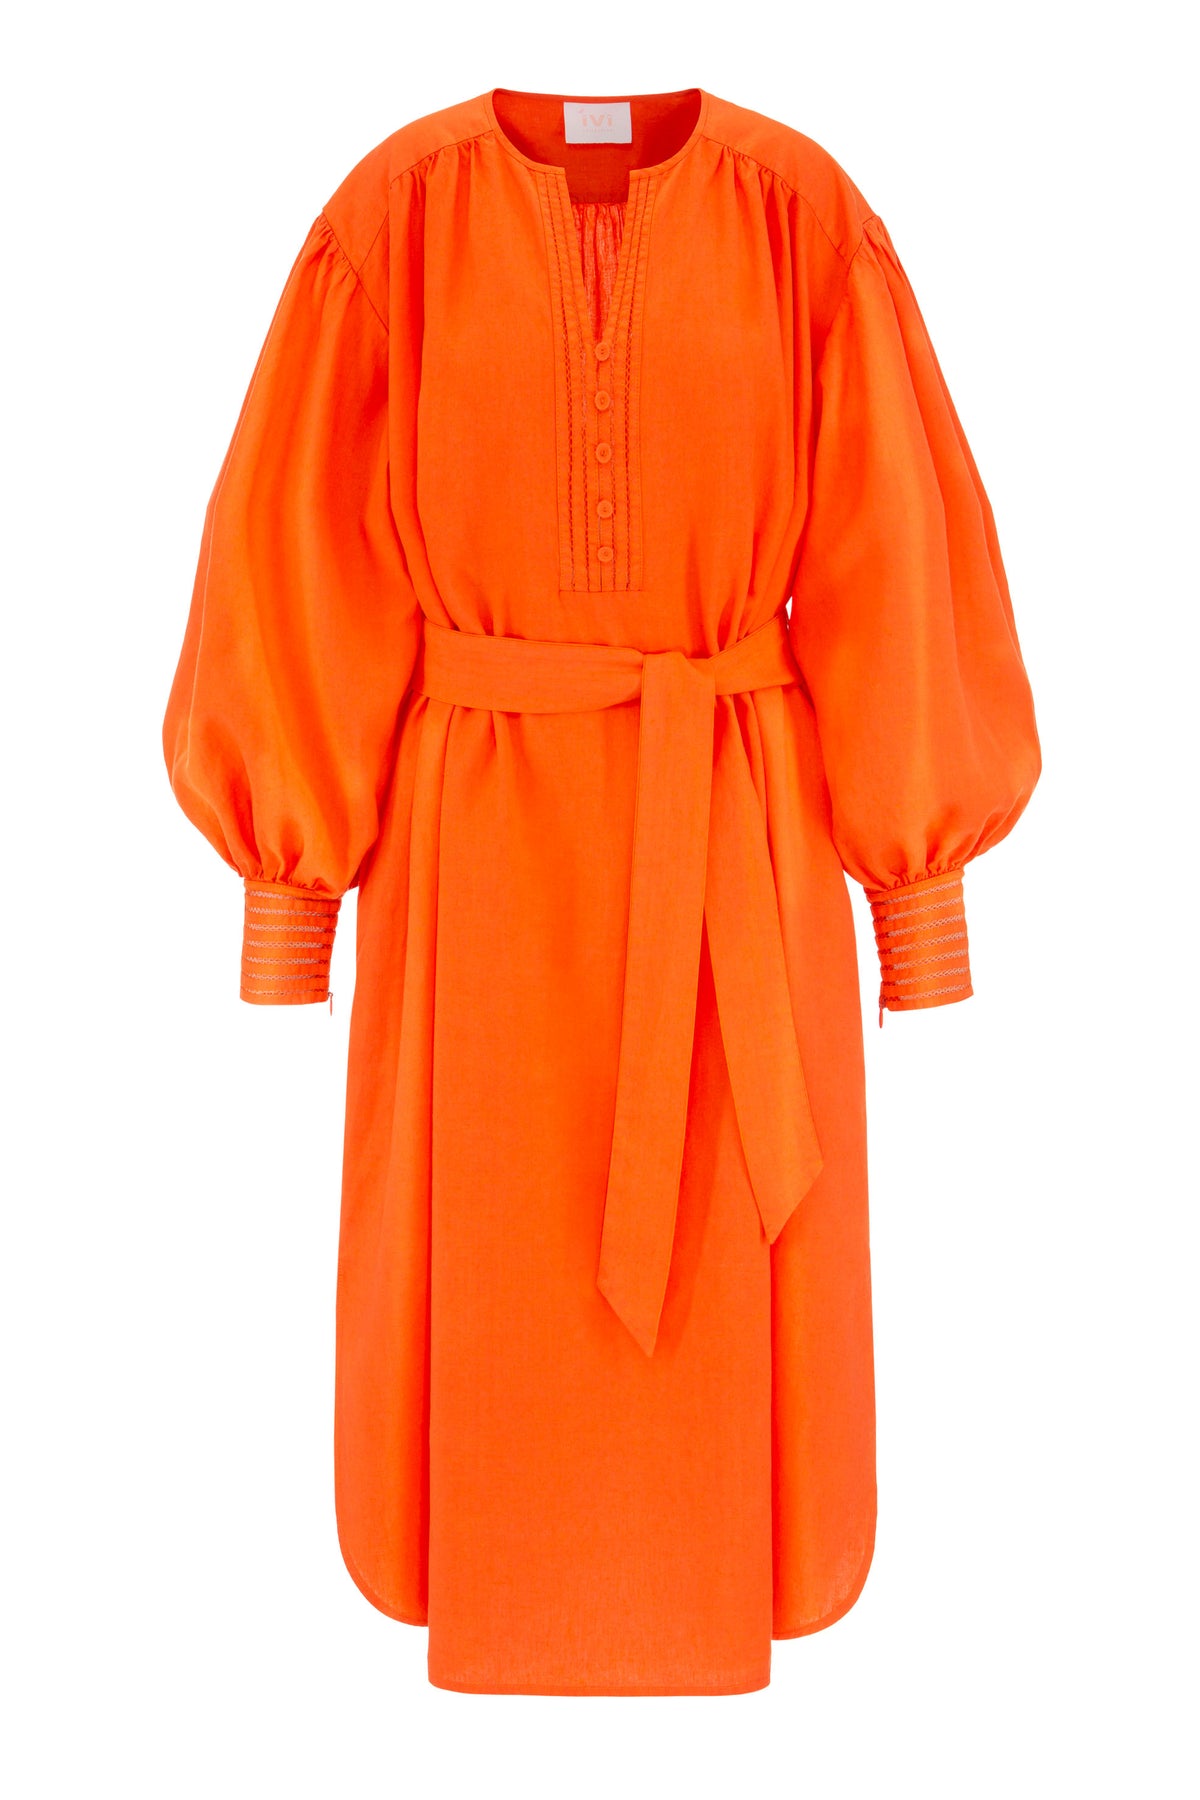 Solid linen coral dress